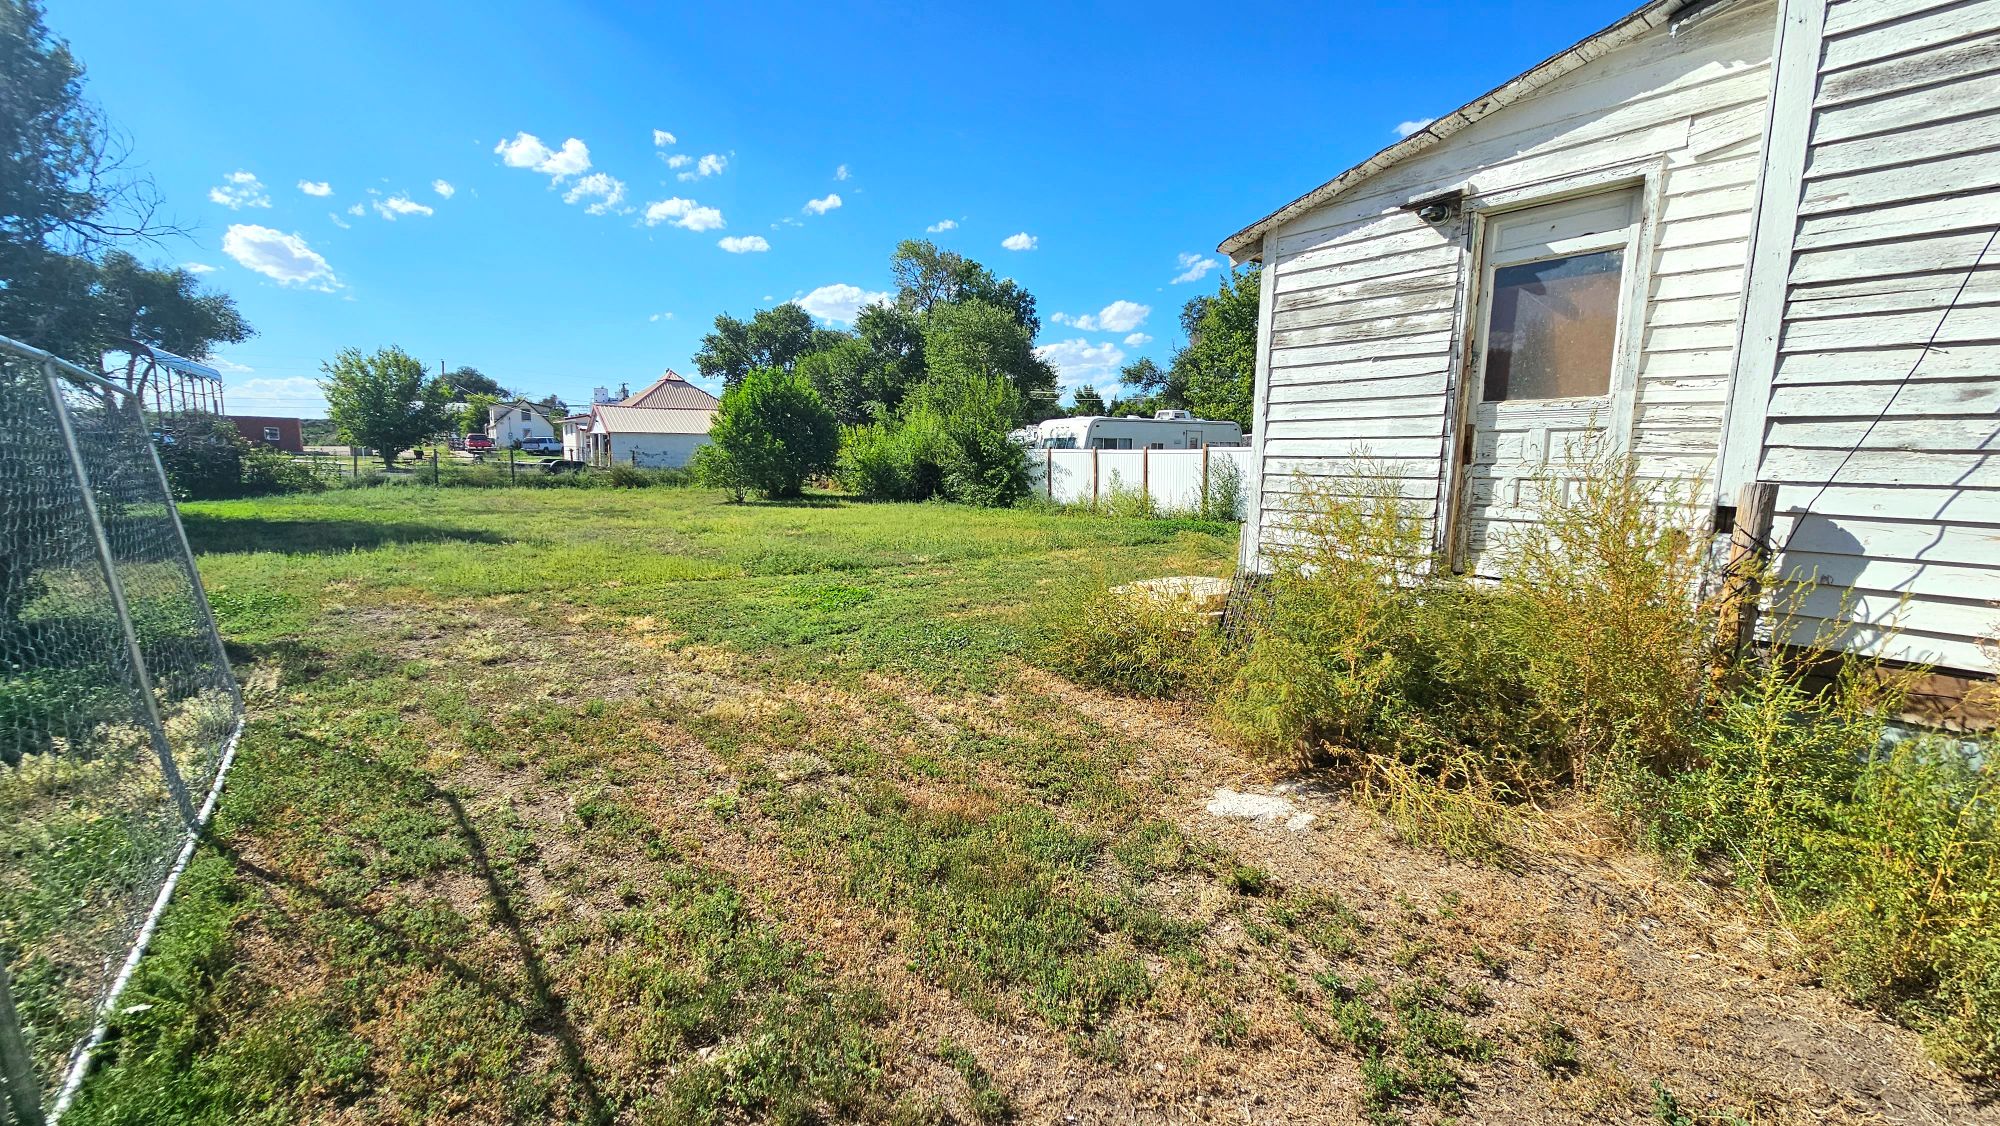 Chappell, NE investment home for sale